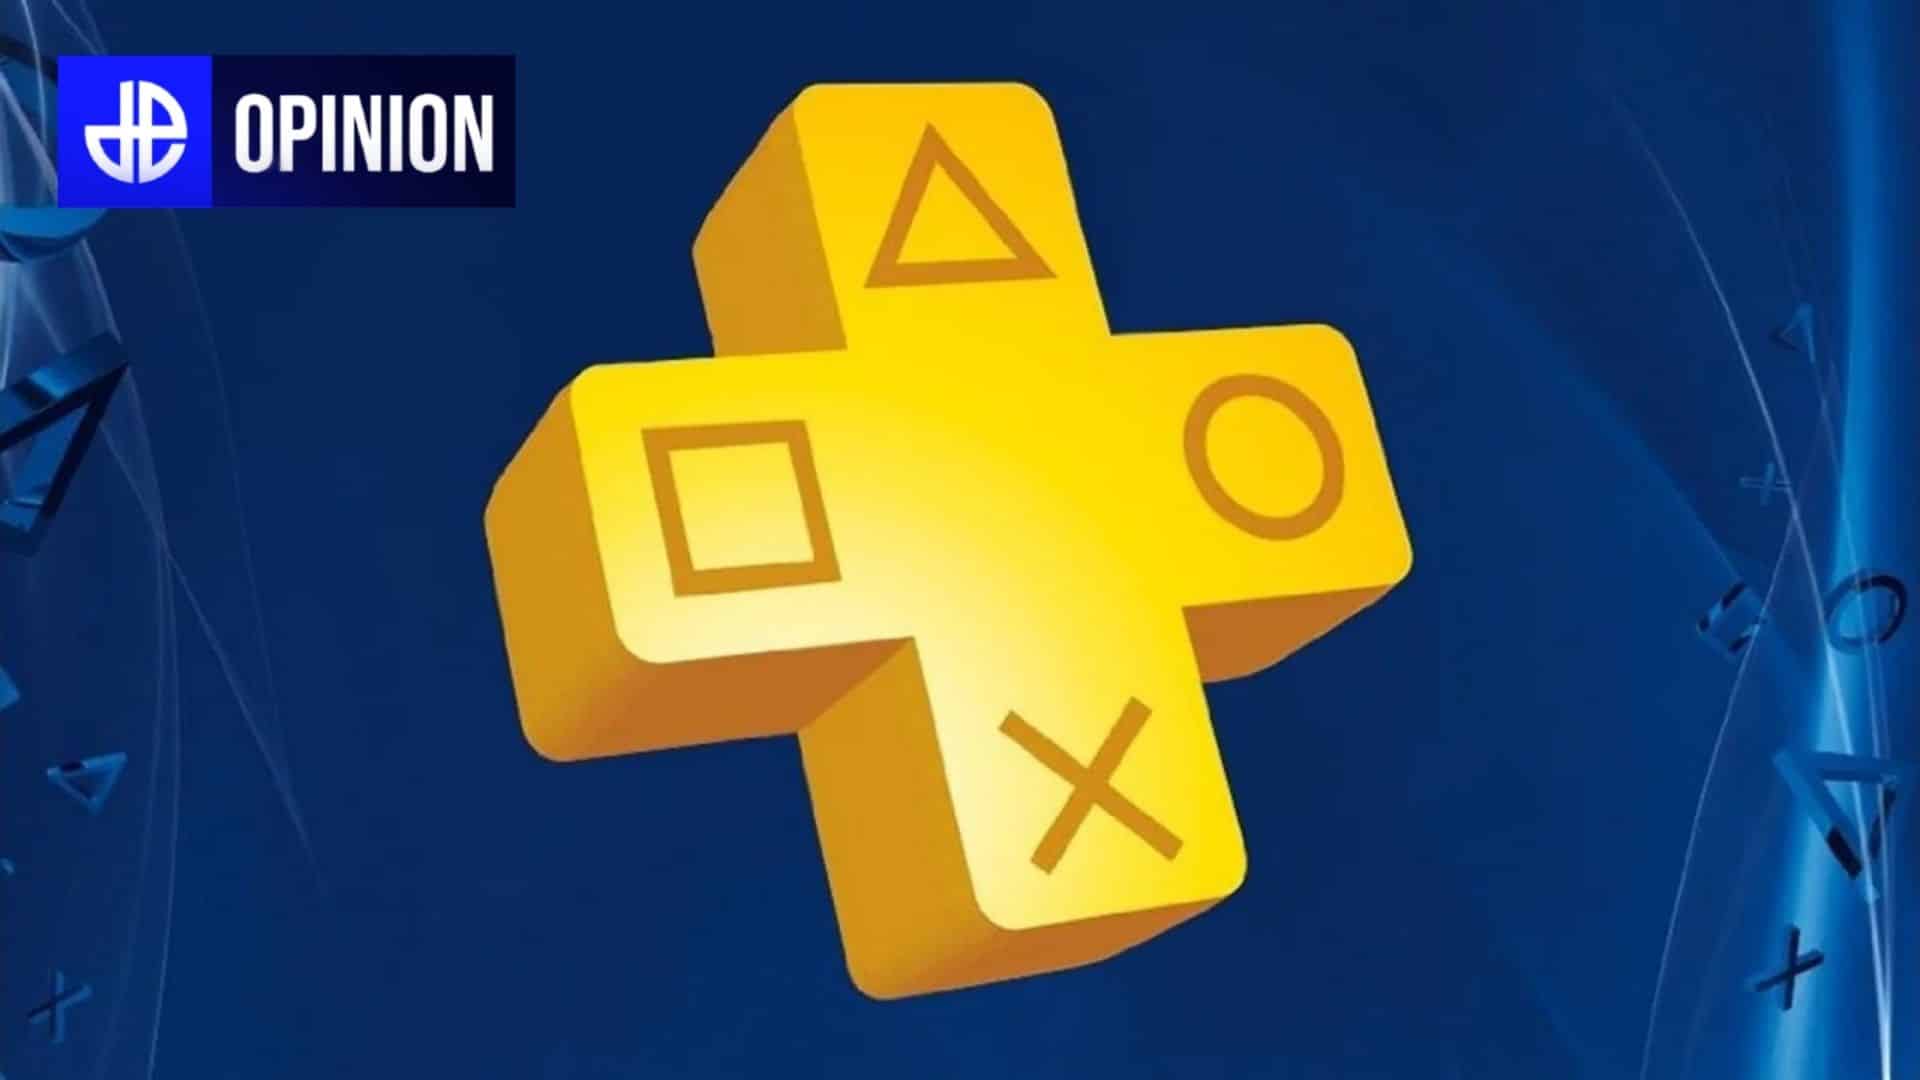 23 Games Join PlayStation Plus' Game Catalog - KeenGamer